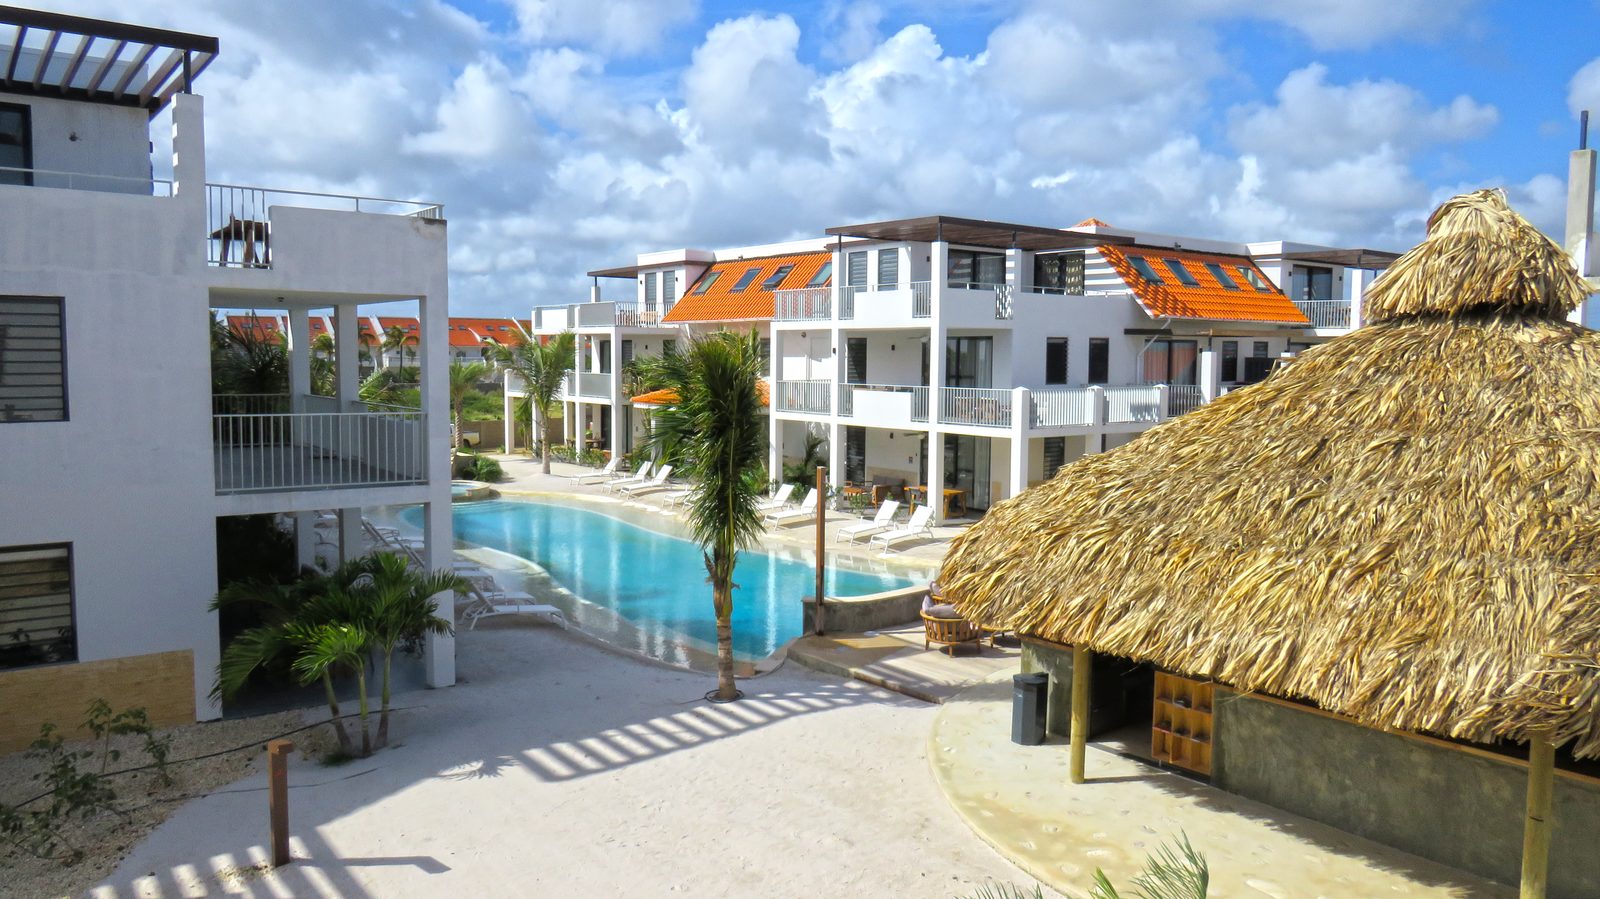 While on Bonaire, you can stay at Resort Bonaire. Luxurious apartments equipped with all the comforts you could wish for. View our available accommodations!